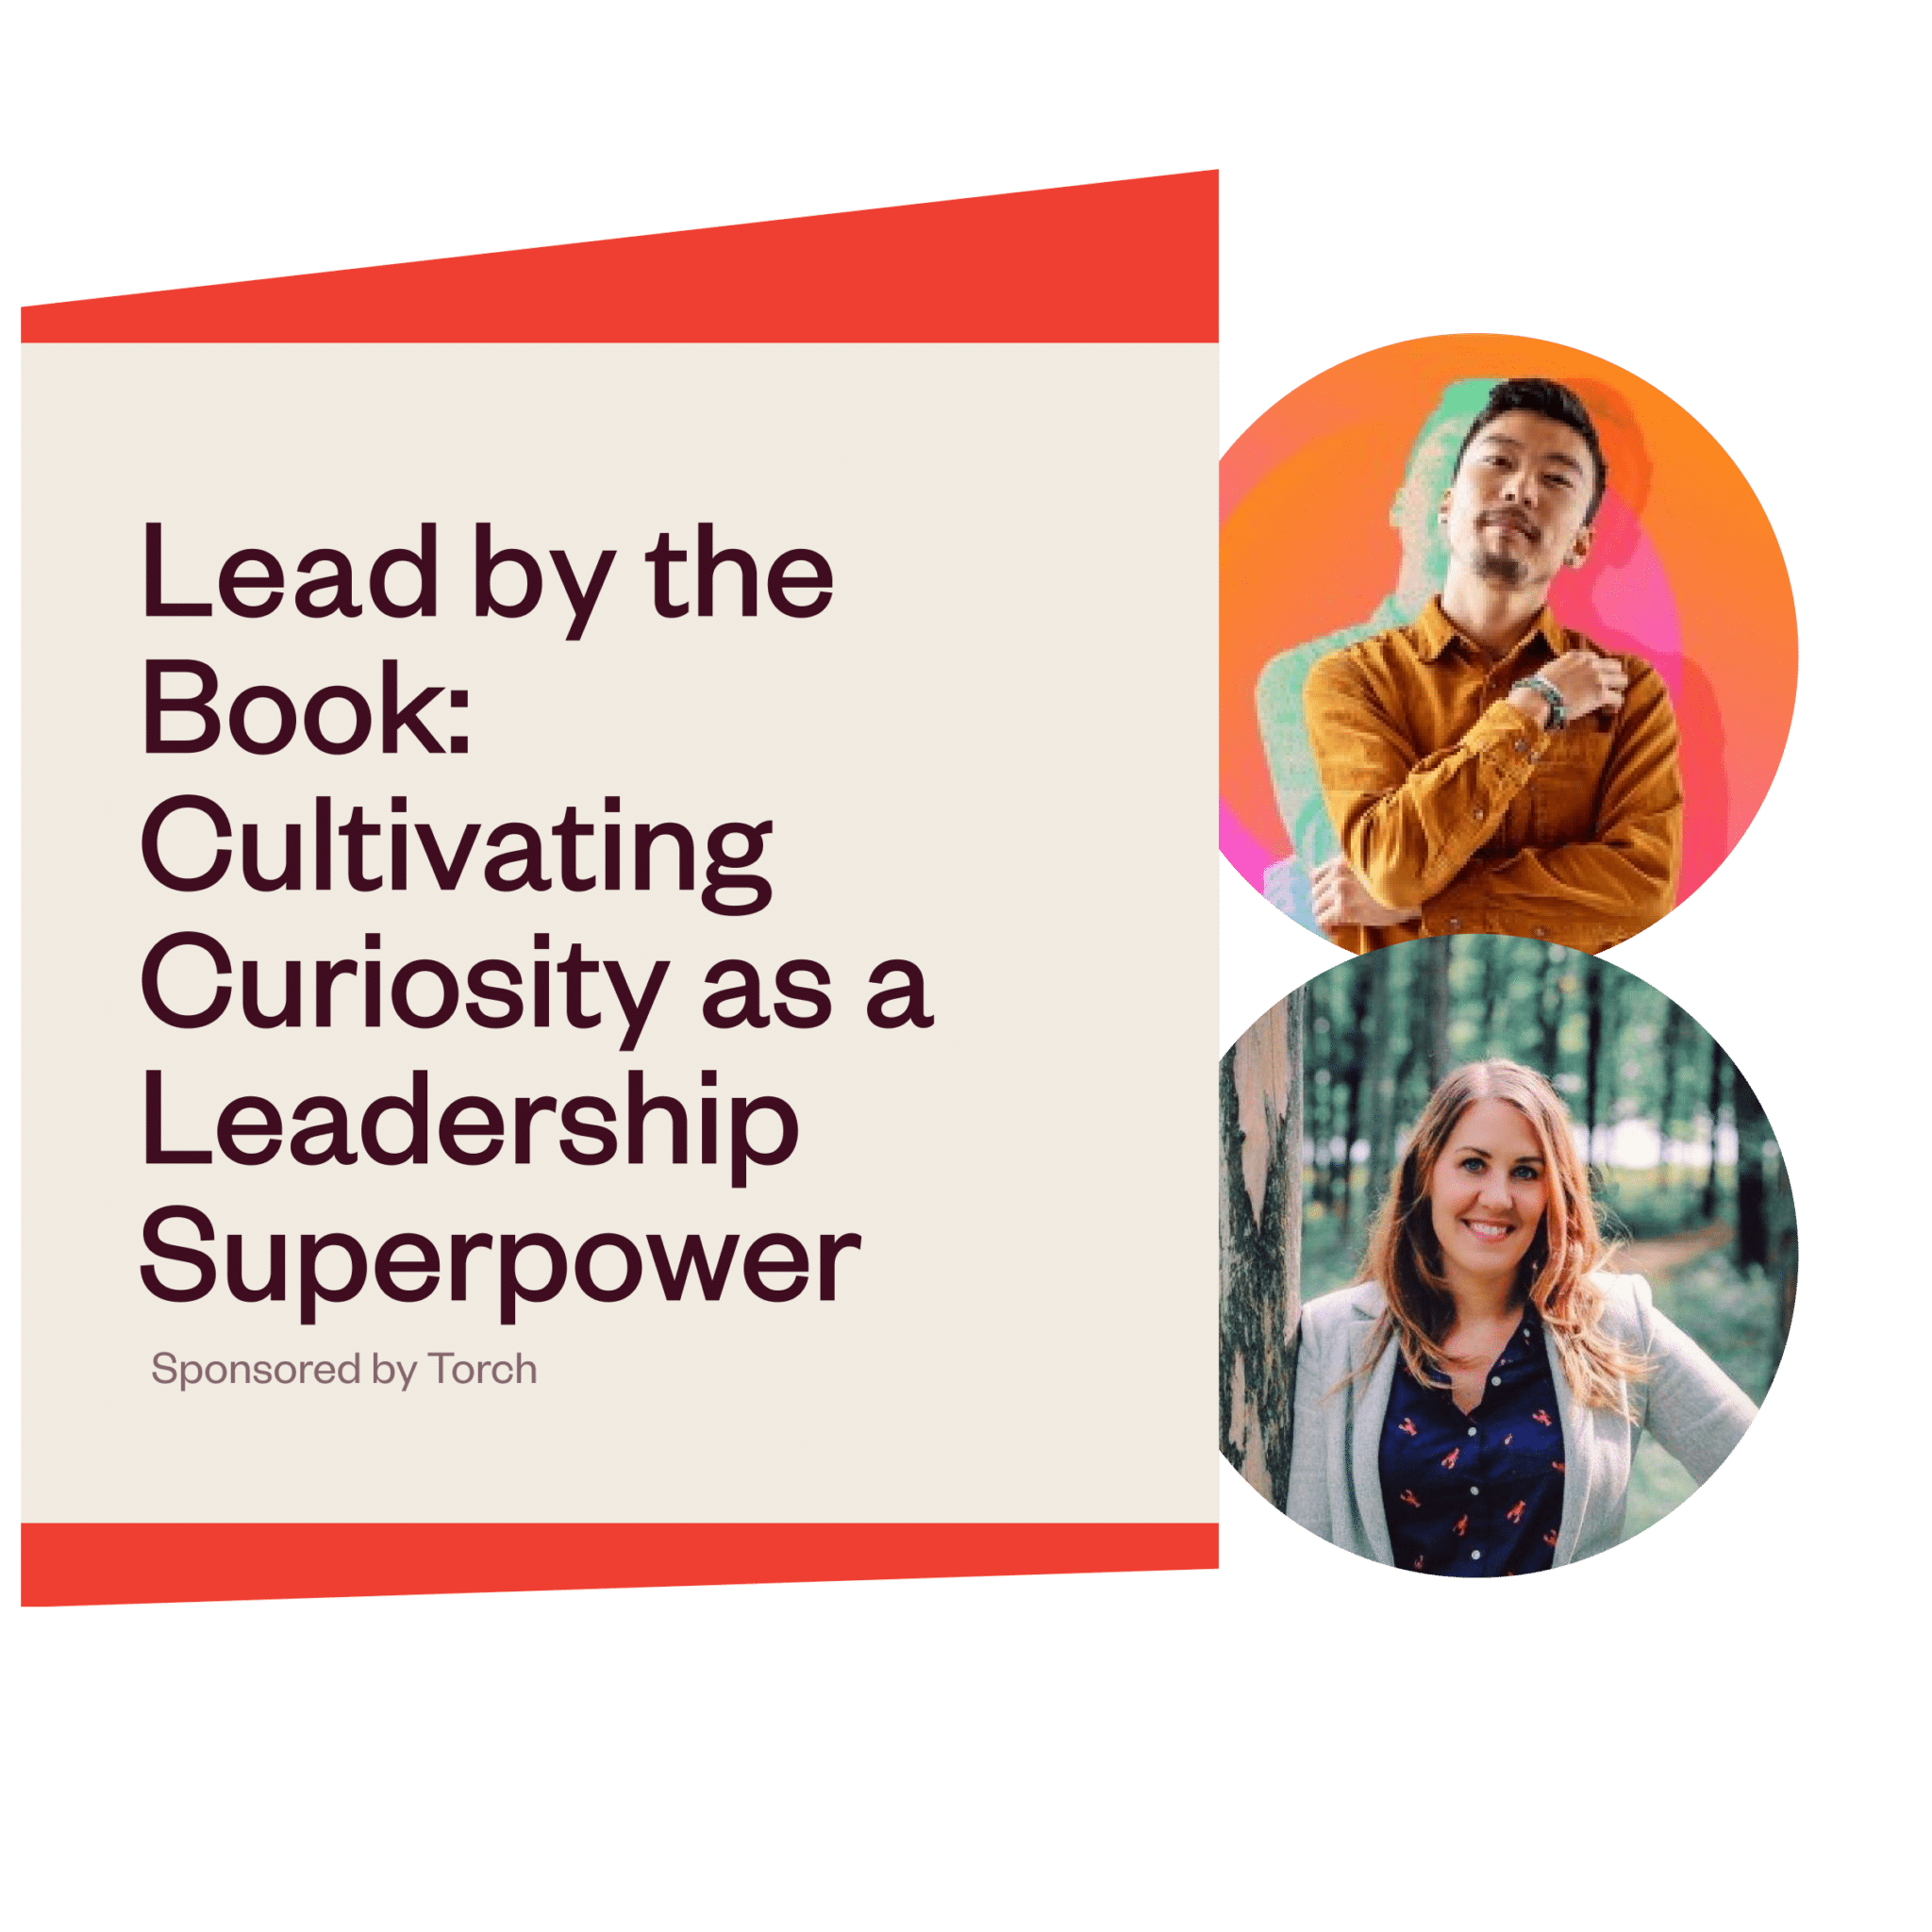 Lead By the Book: Cultivating Curiosity as a Leadership Superpower